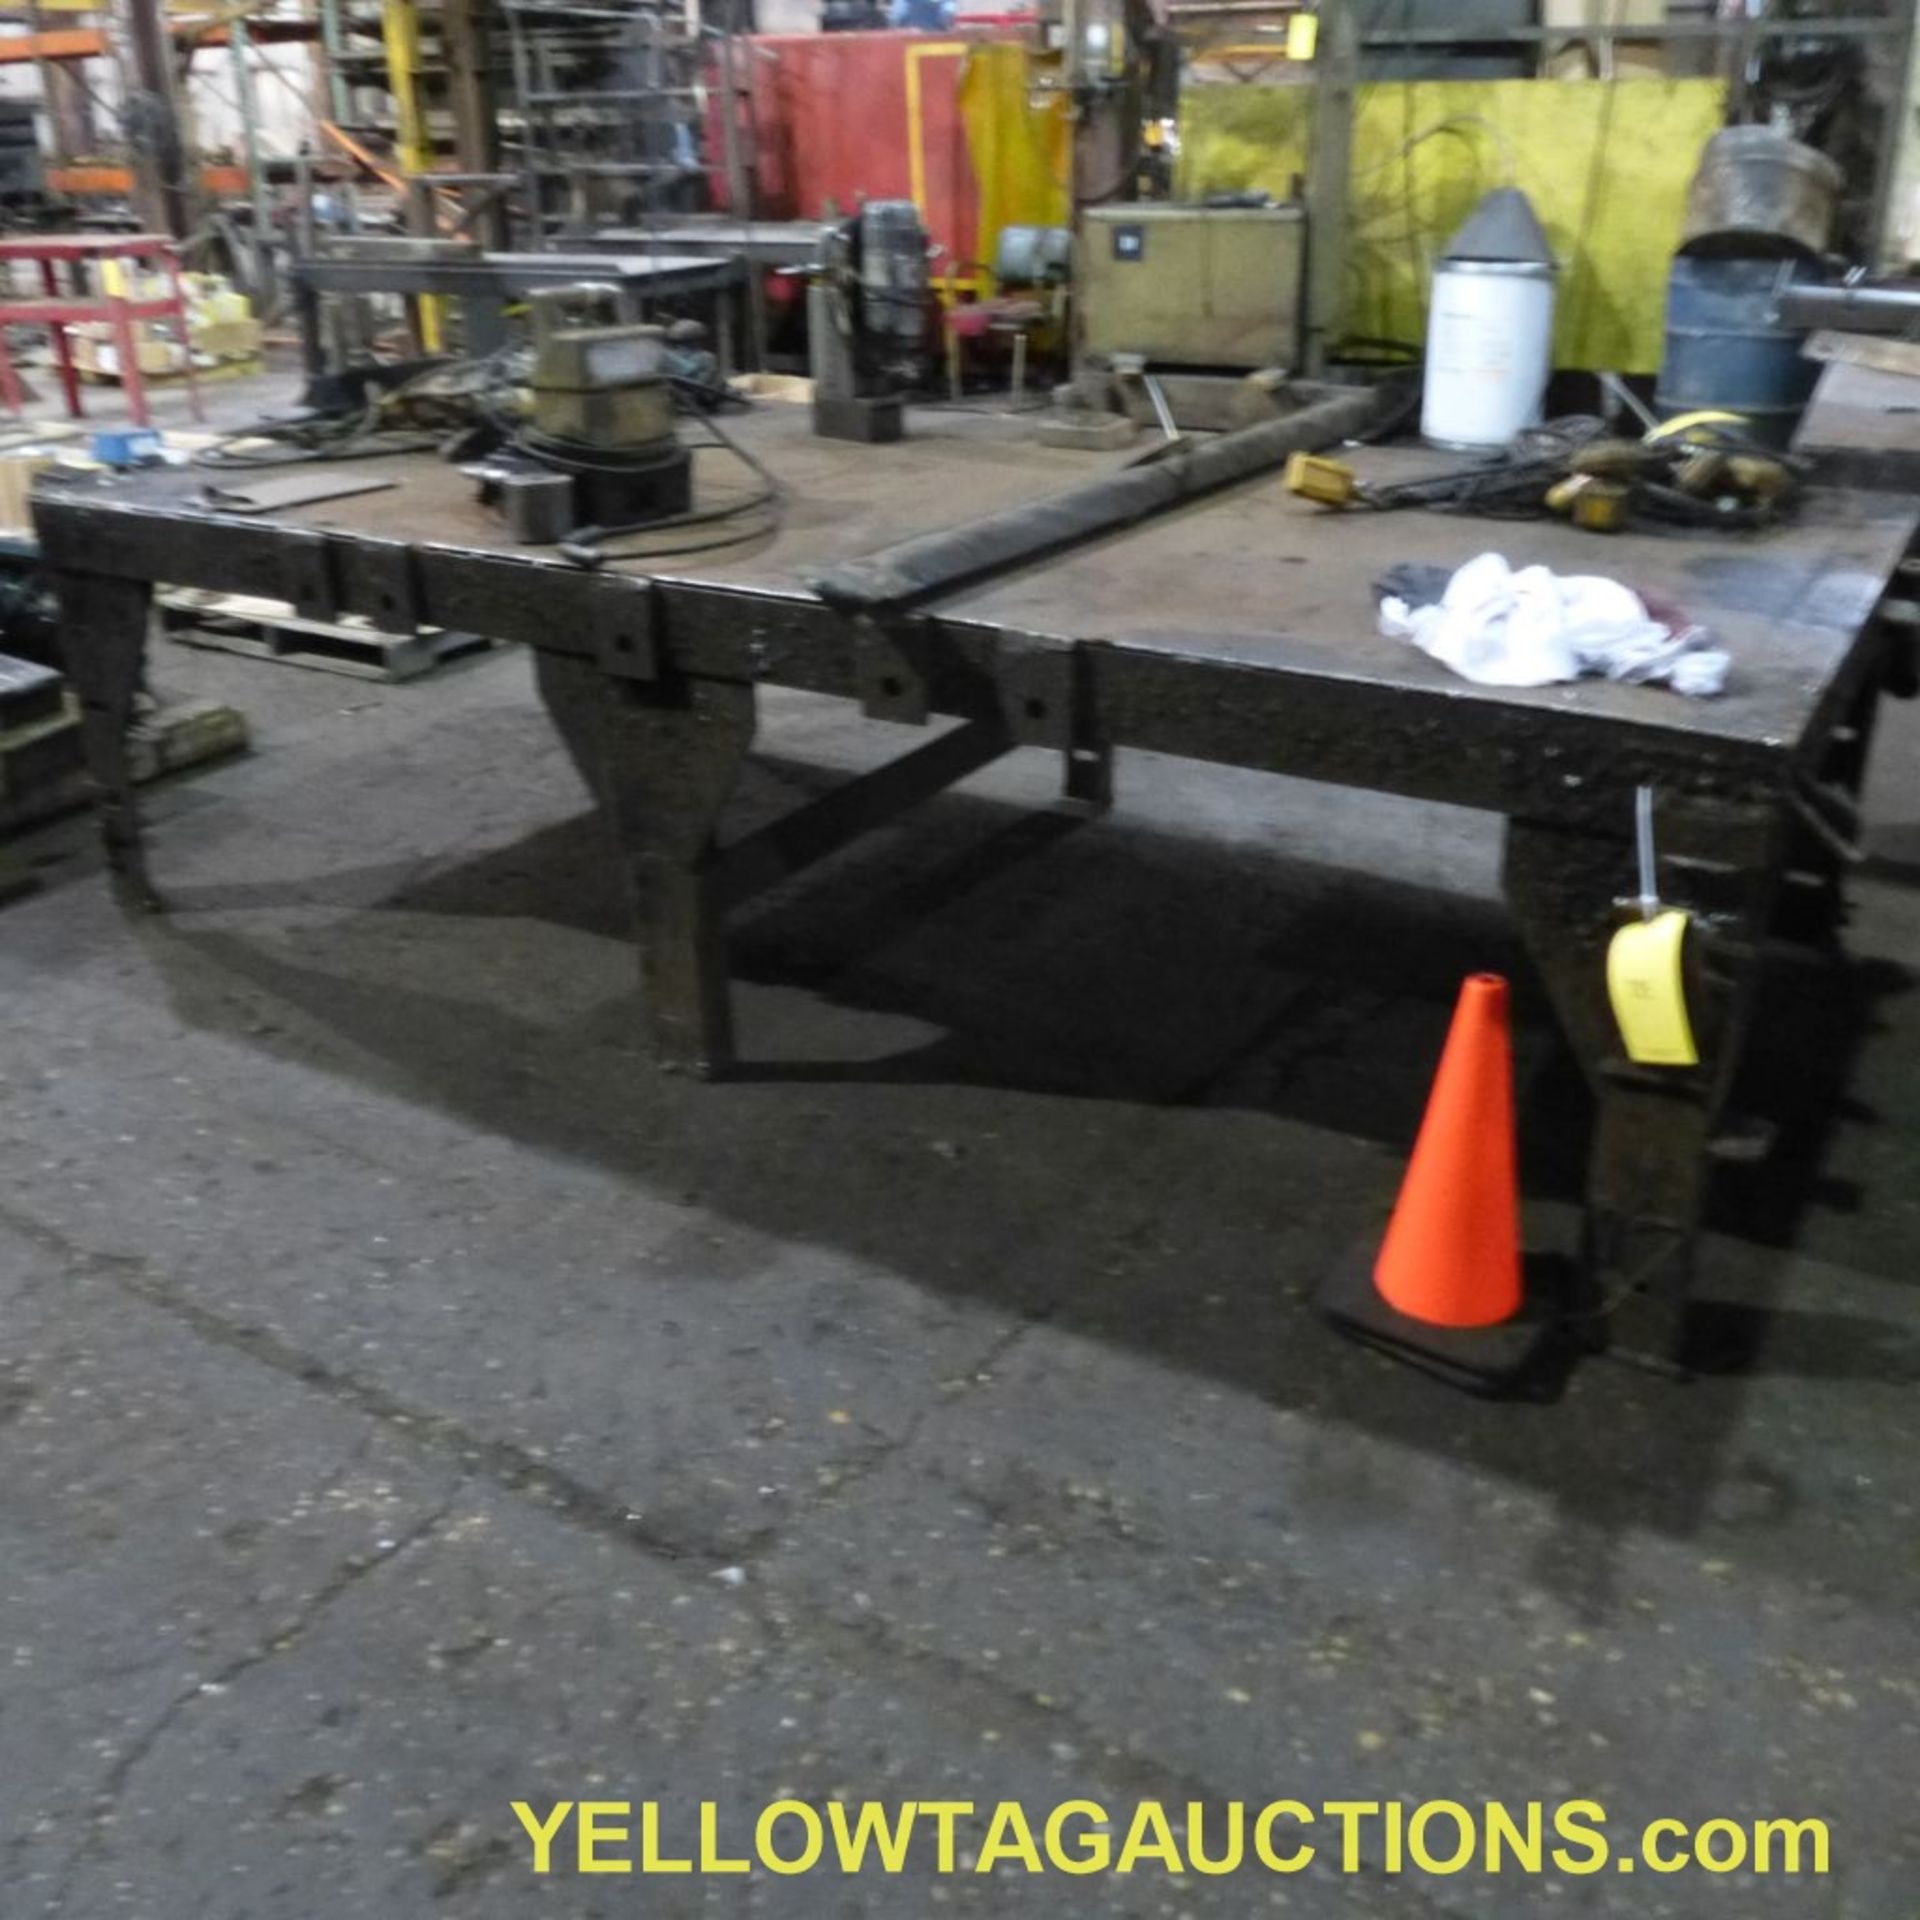 Steel Work Bench/Welding Table|58" x 120" x 33"|Tag: 785